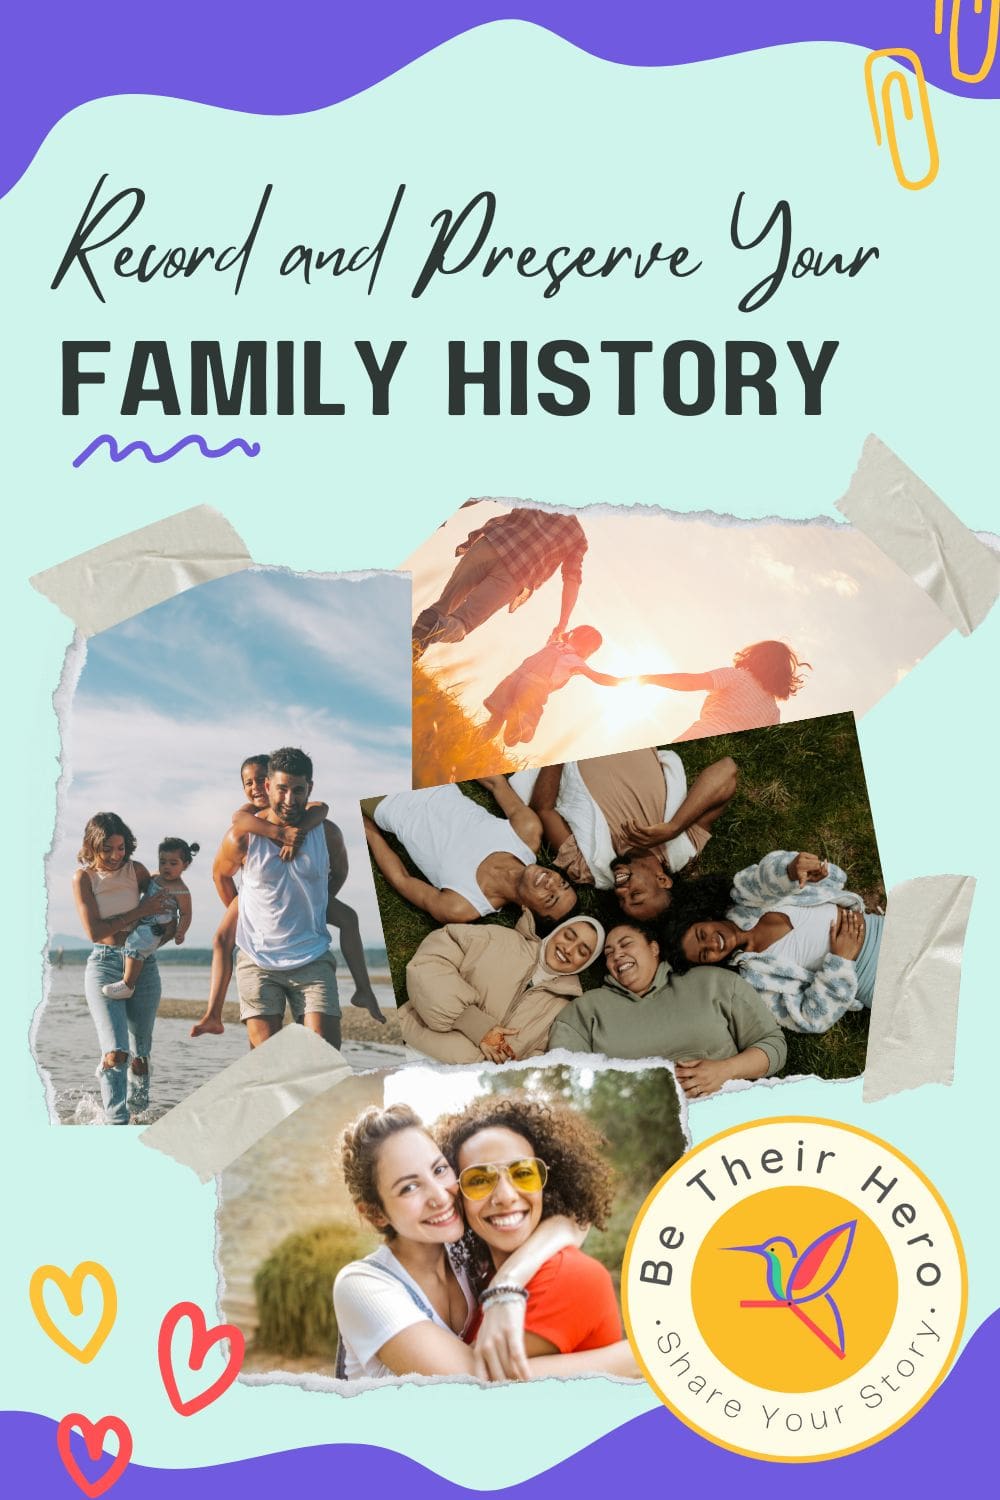 Record and Preserve Your Family History with Klokbox